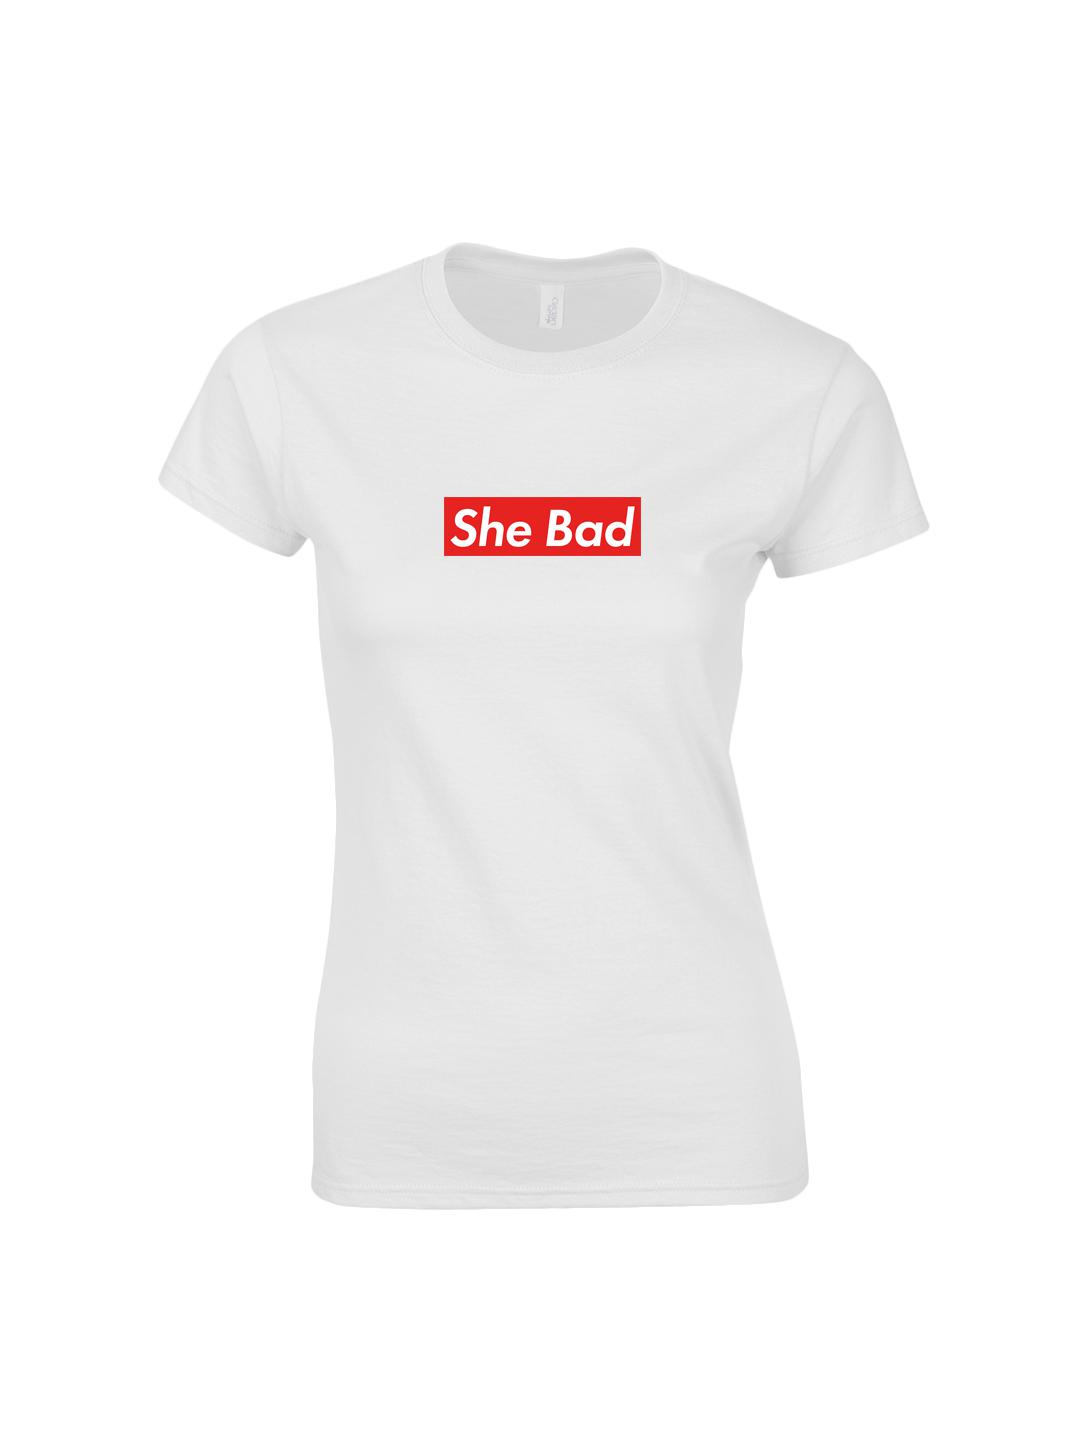 SHE BAD fitted tshirt